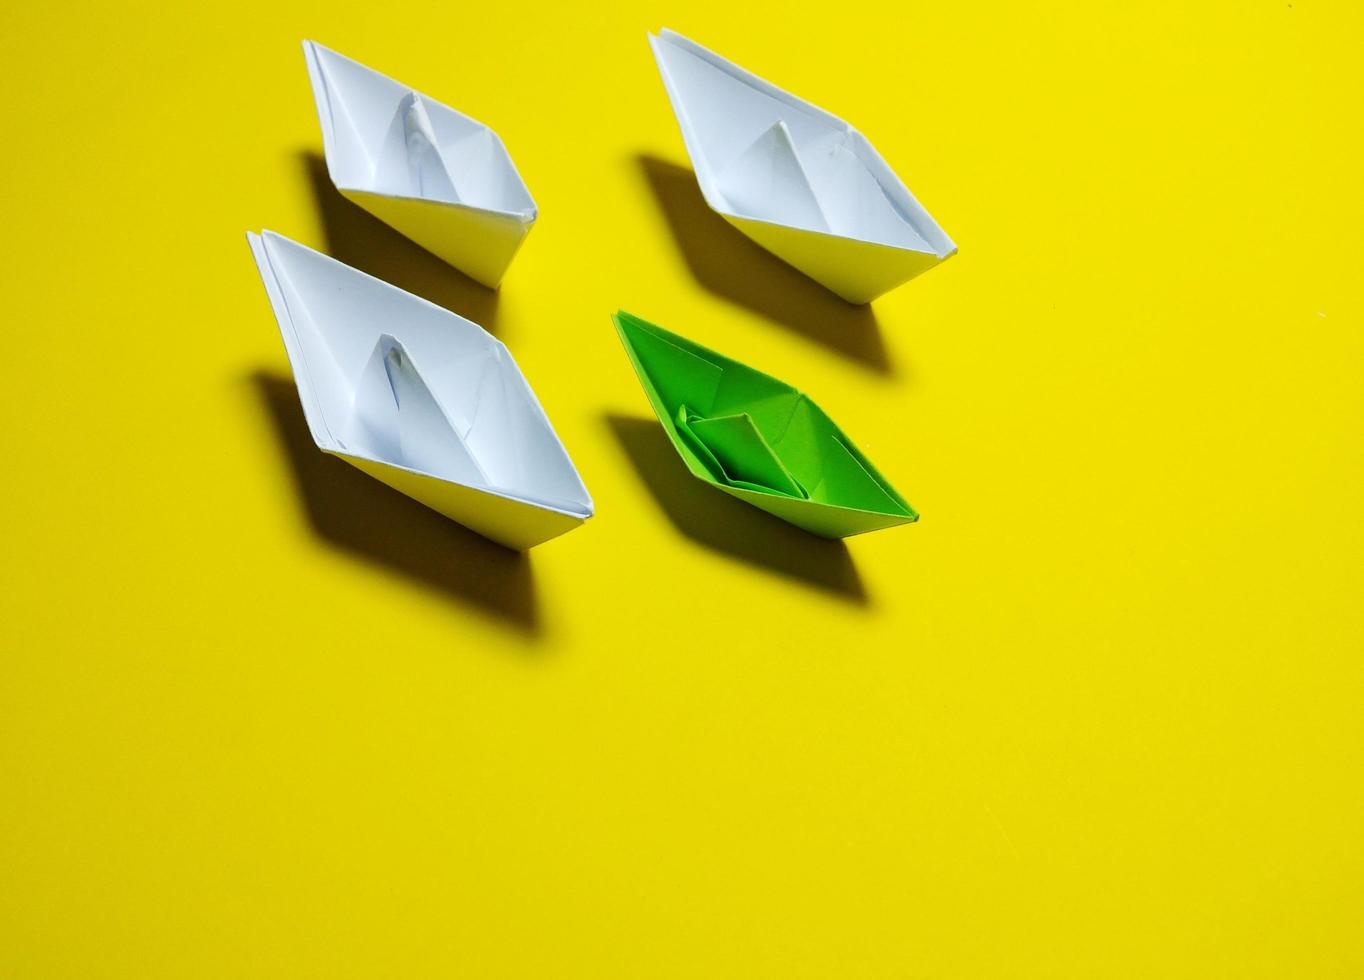 white and green paper boat yellow background in an orderly manner, providing ideas, leadership and effective management give a feeling have solidarity success, love, happiness, great photo